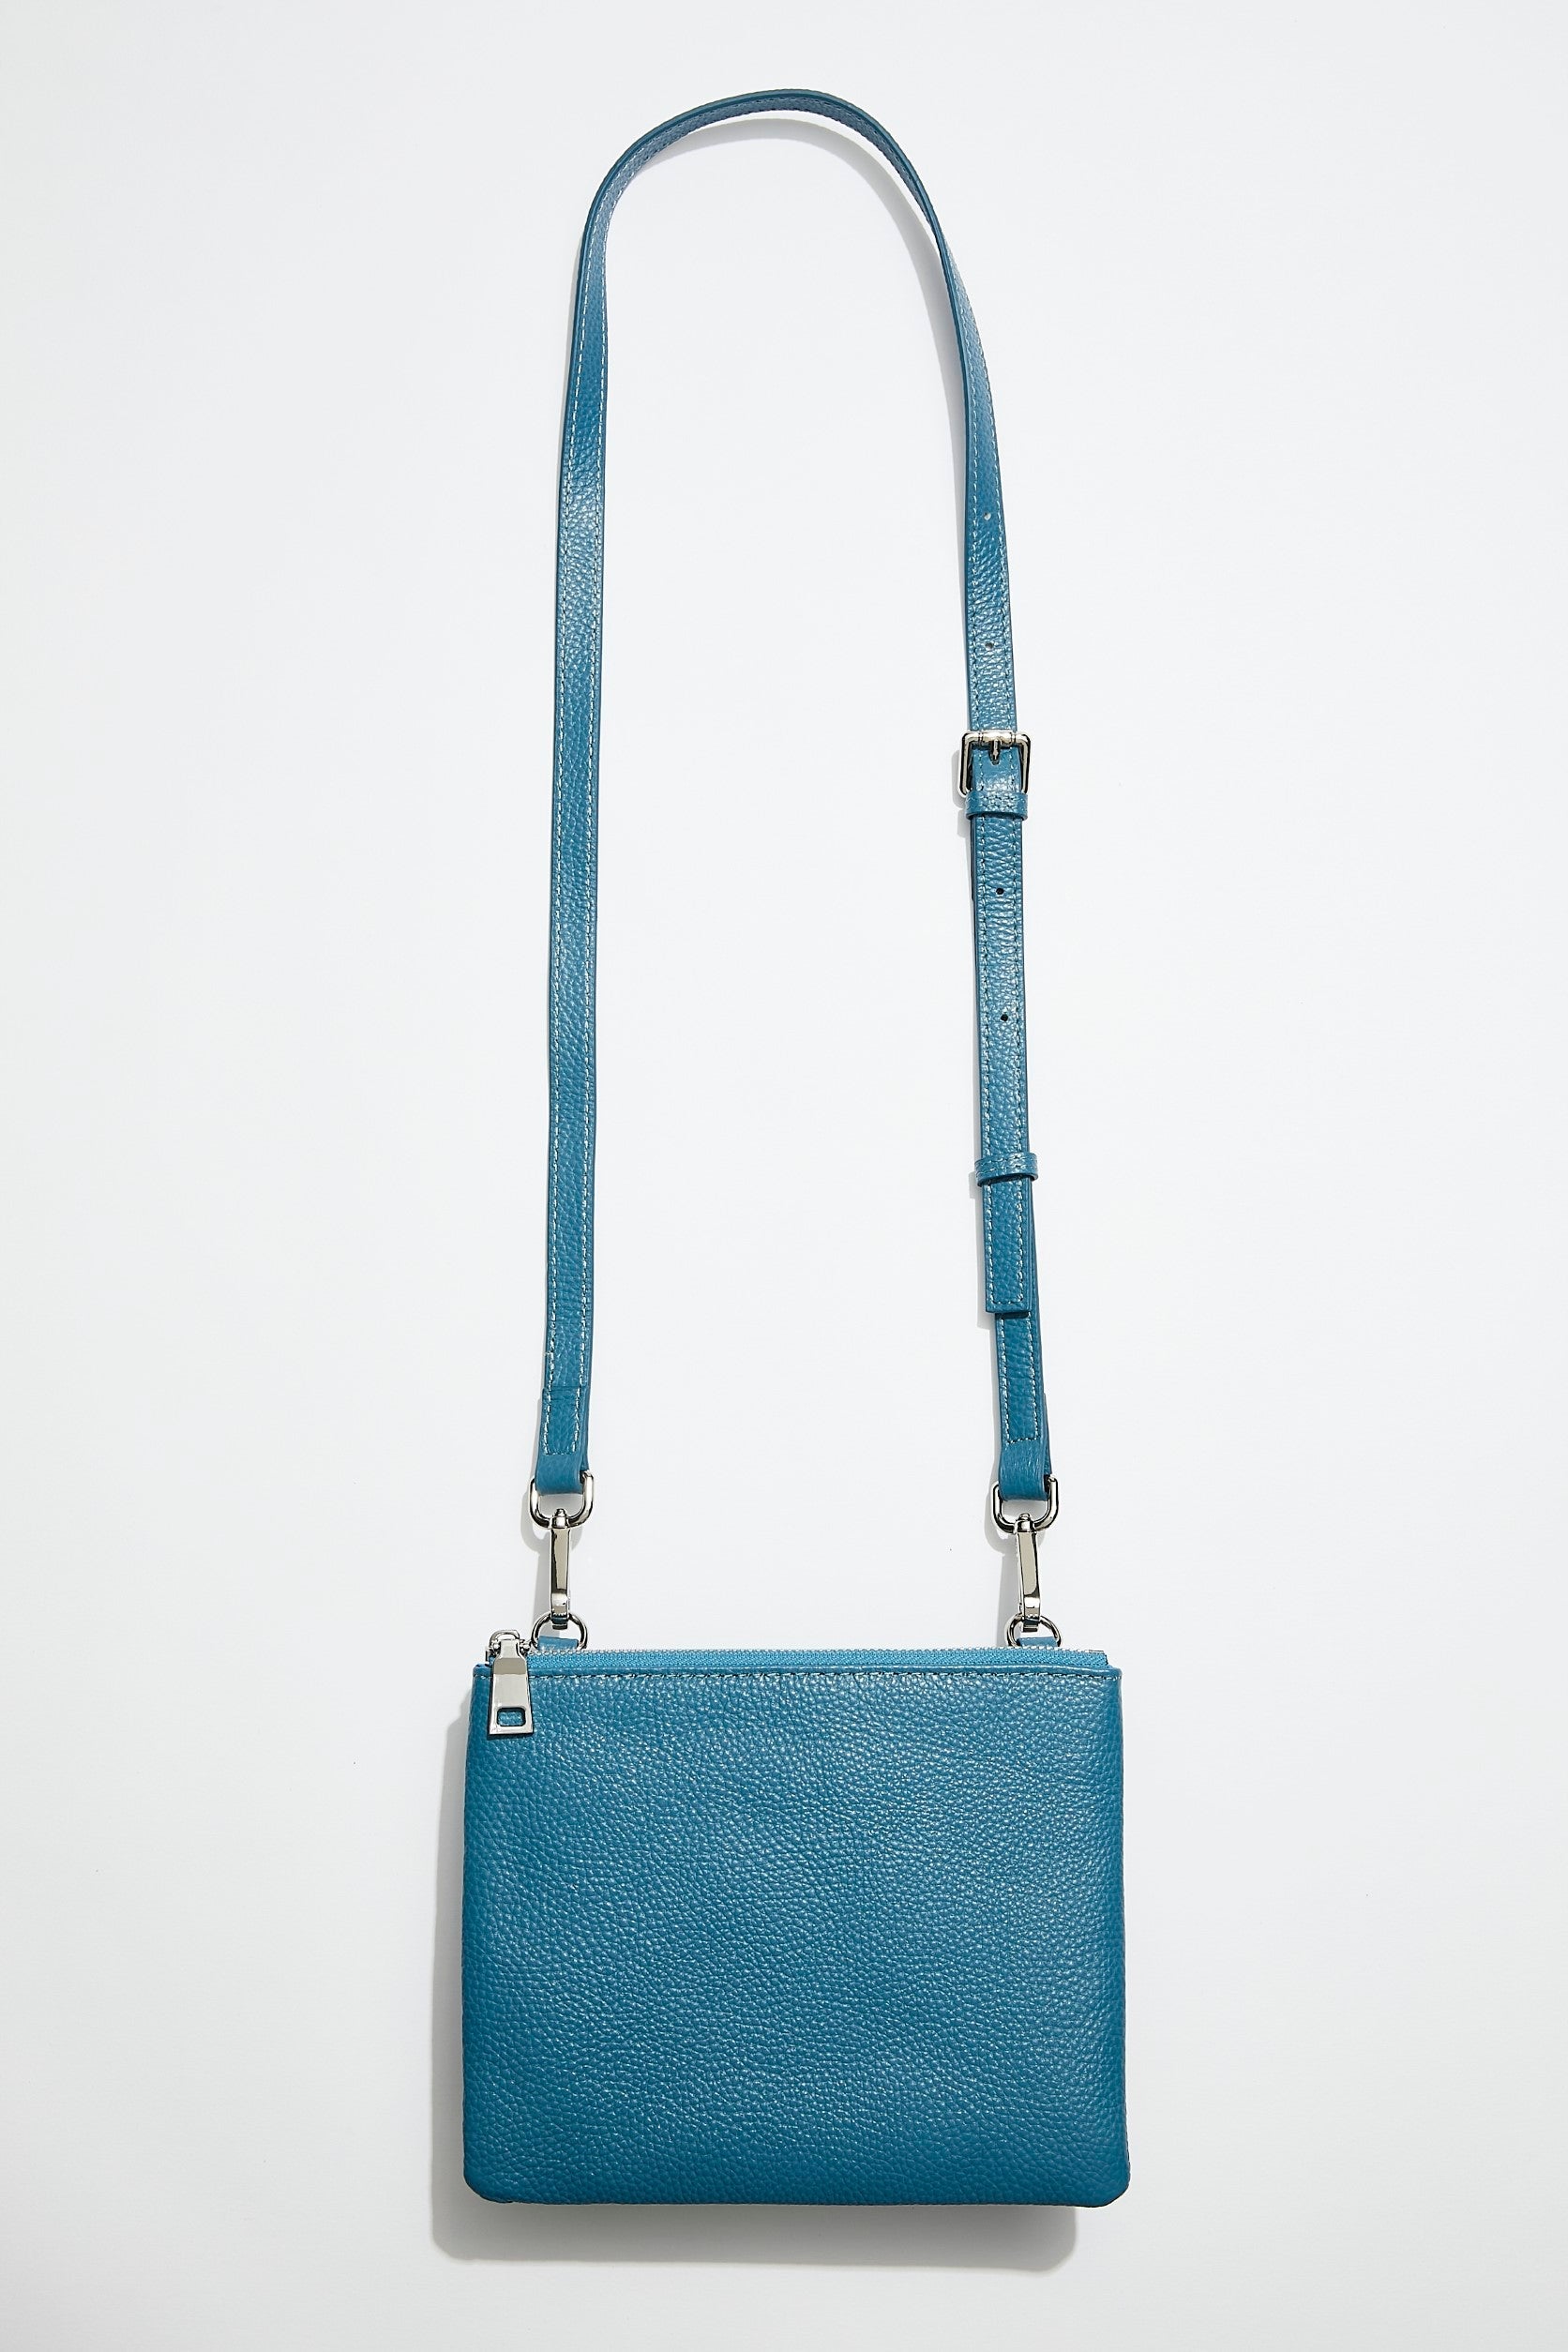 front view of mon purse's sky blue pebbled leather single pouch bag